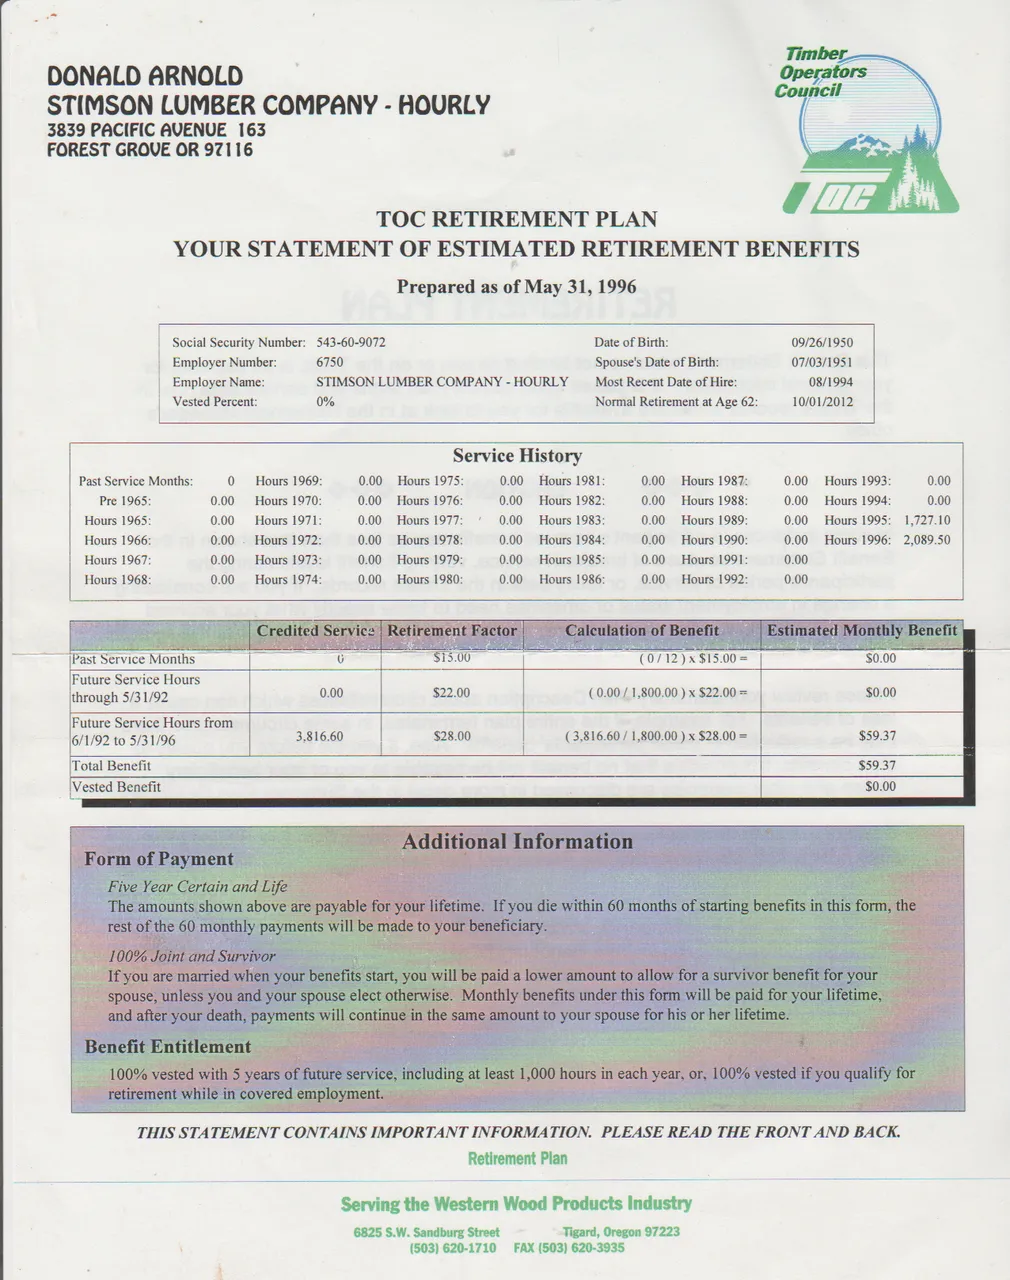 1996-05-31 - Friday - Stimson Lumber Company - Timber Operators Council Retirement Plan-1.png